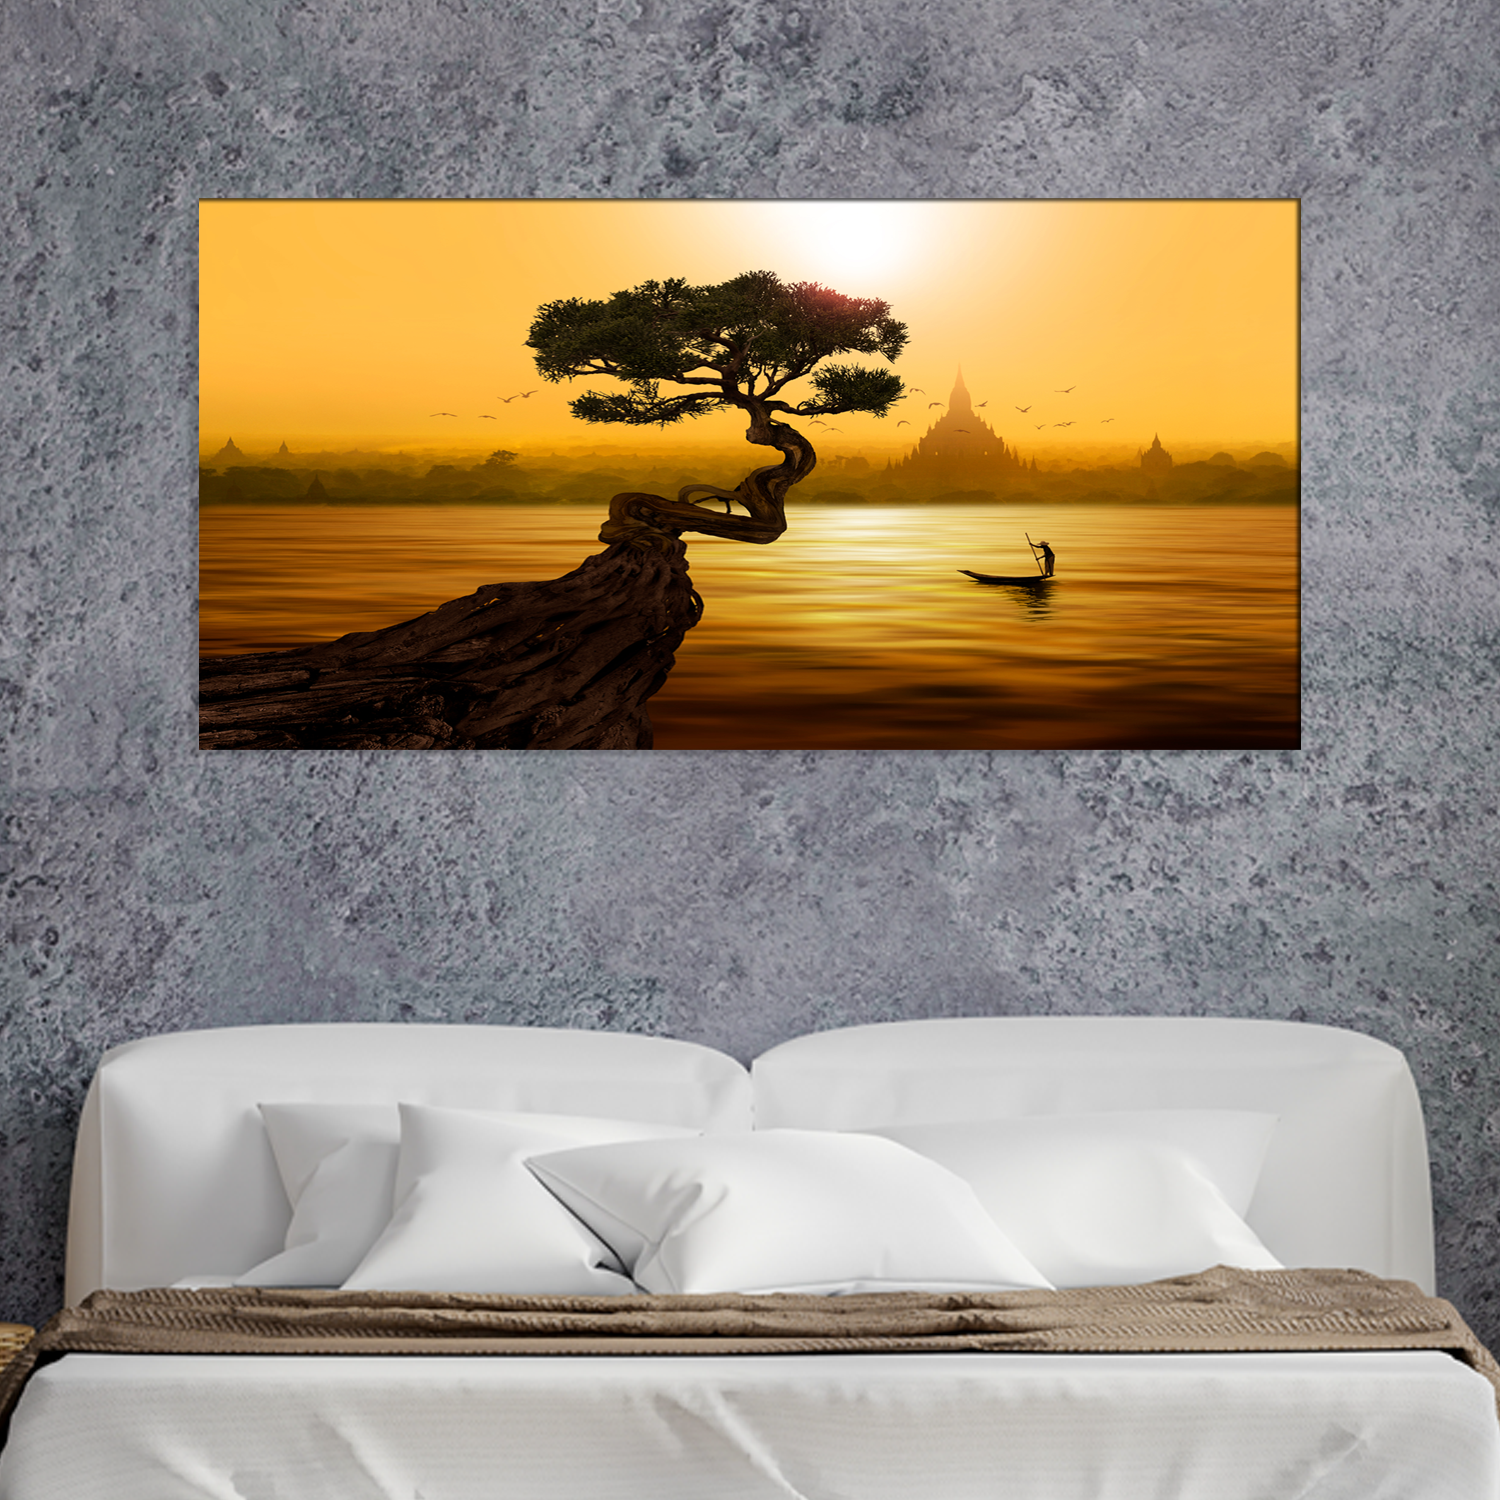 Twisted tree lake and Buddhist temple Canvas Print Wall Painting